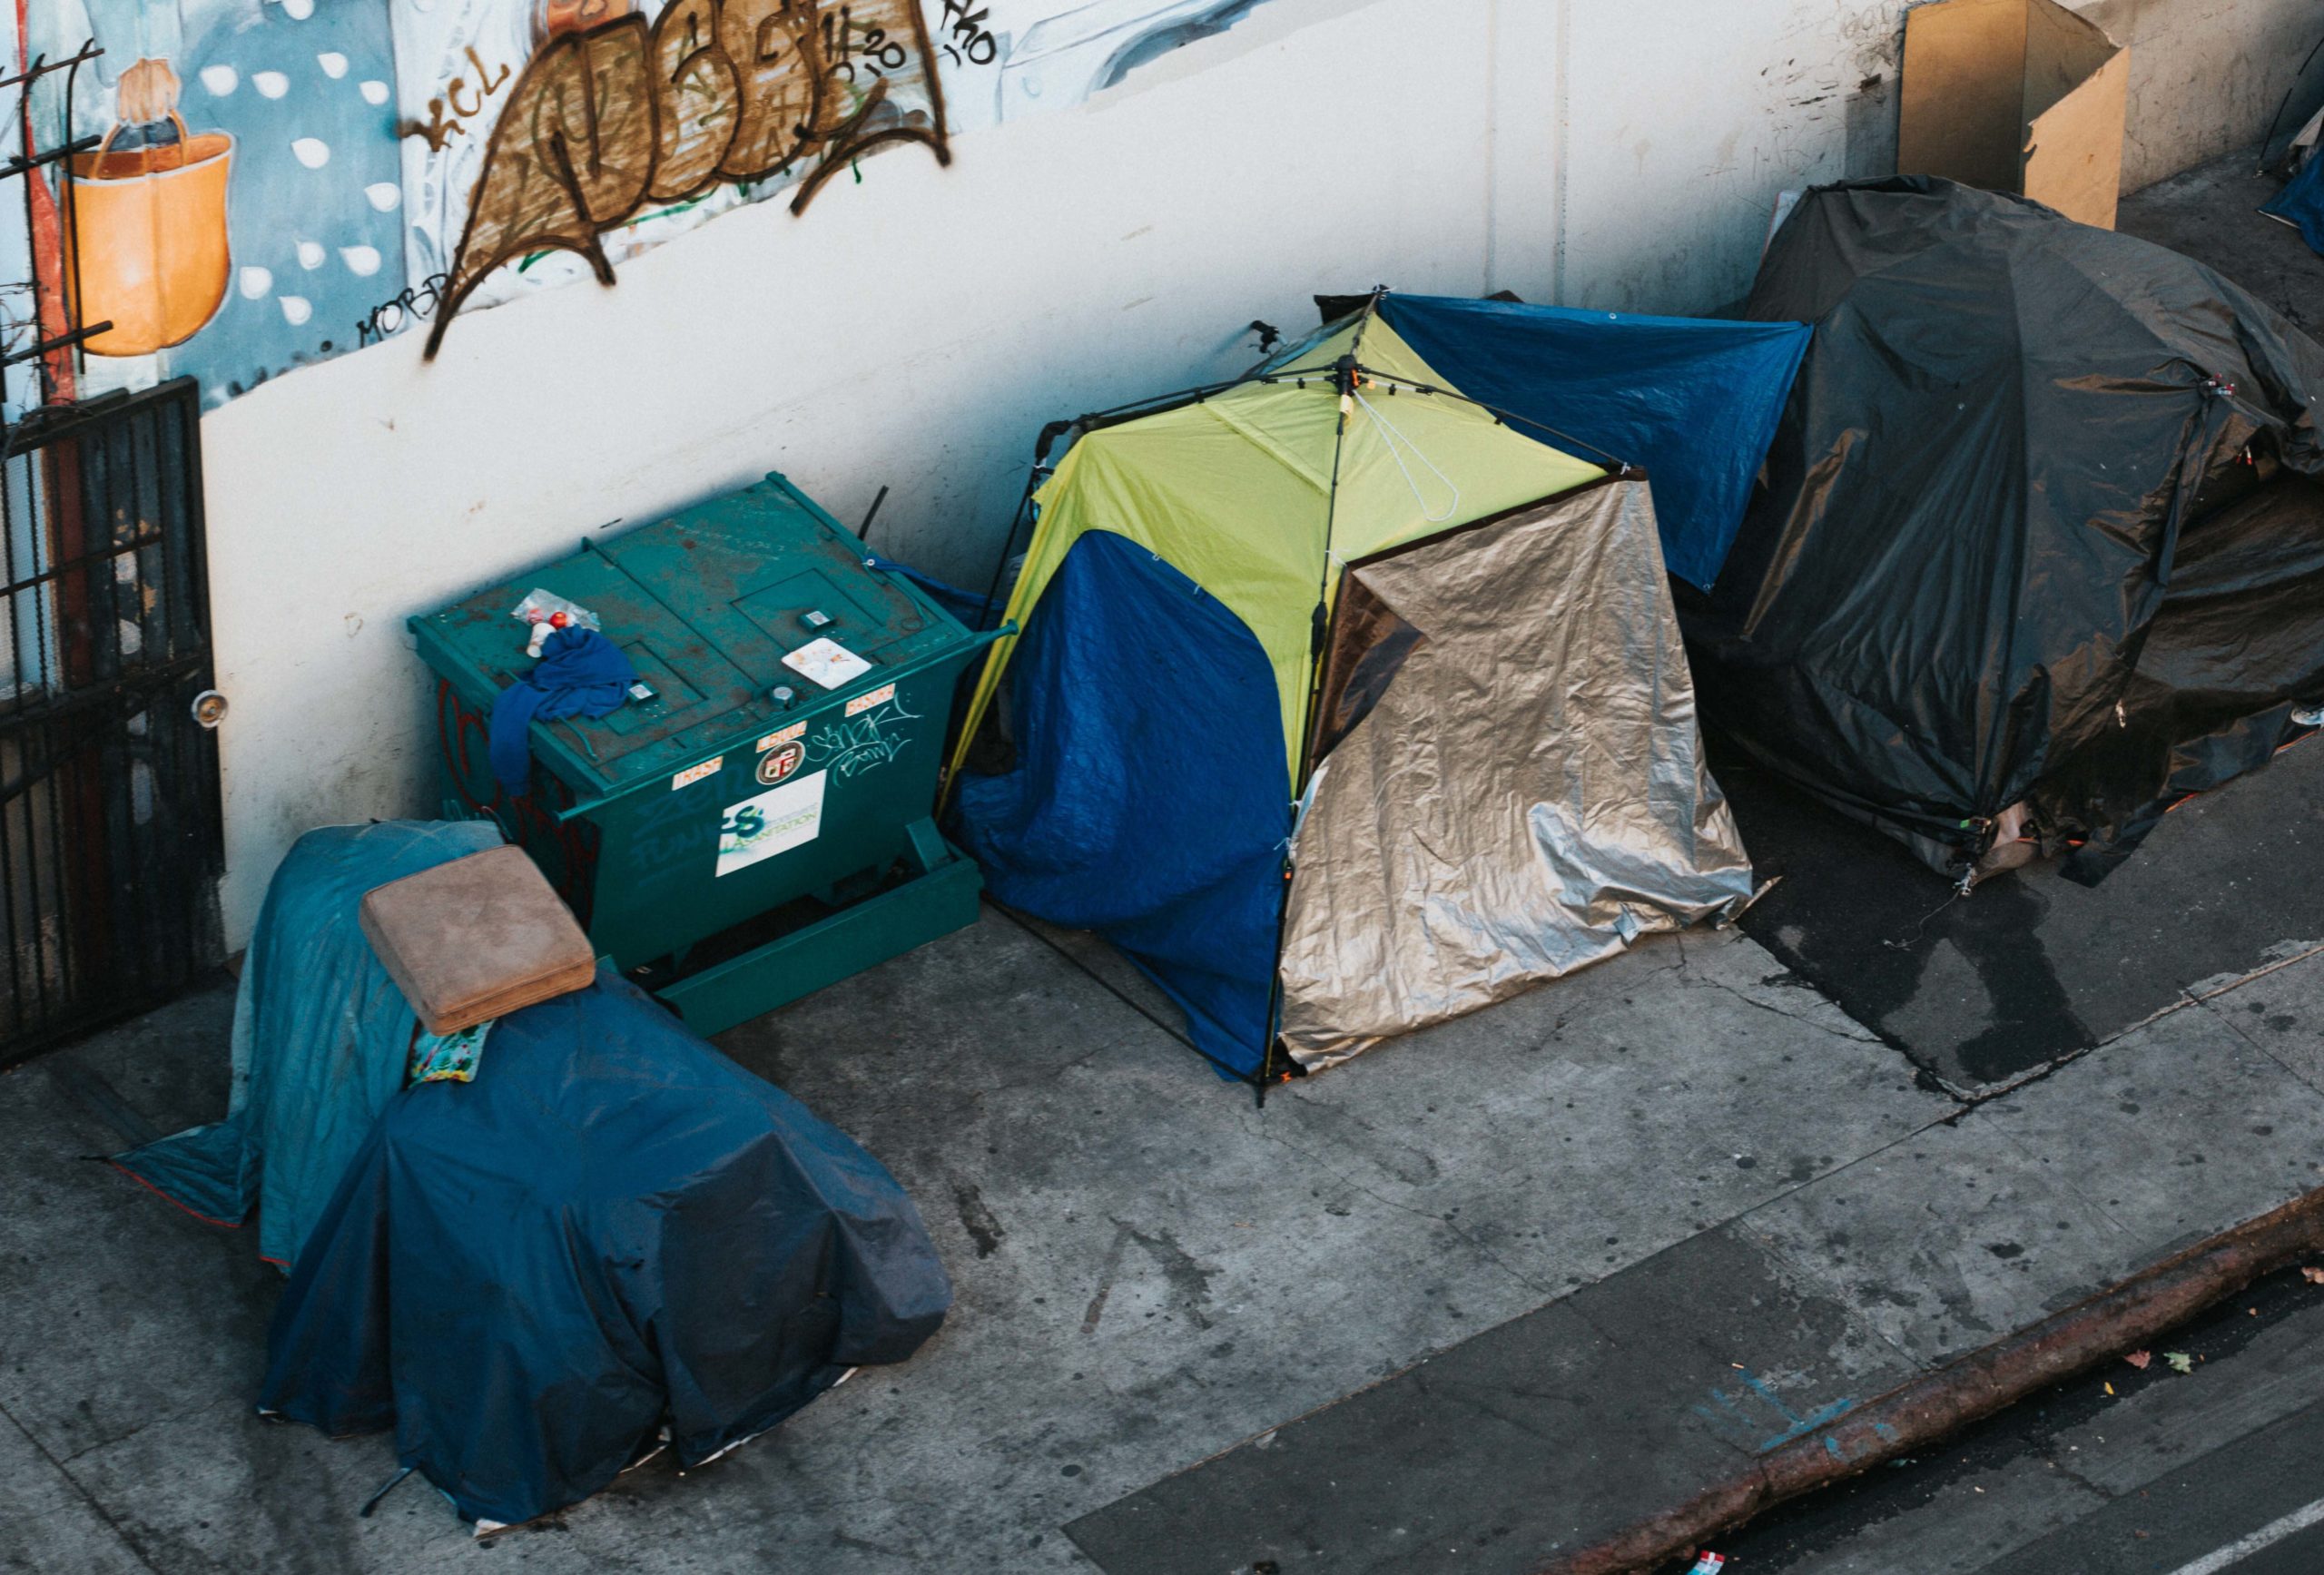 Homeless tents scaled 1 for